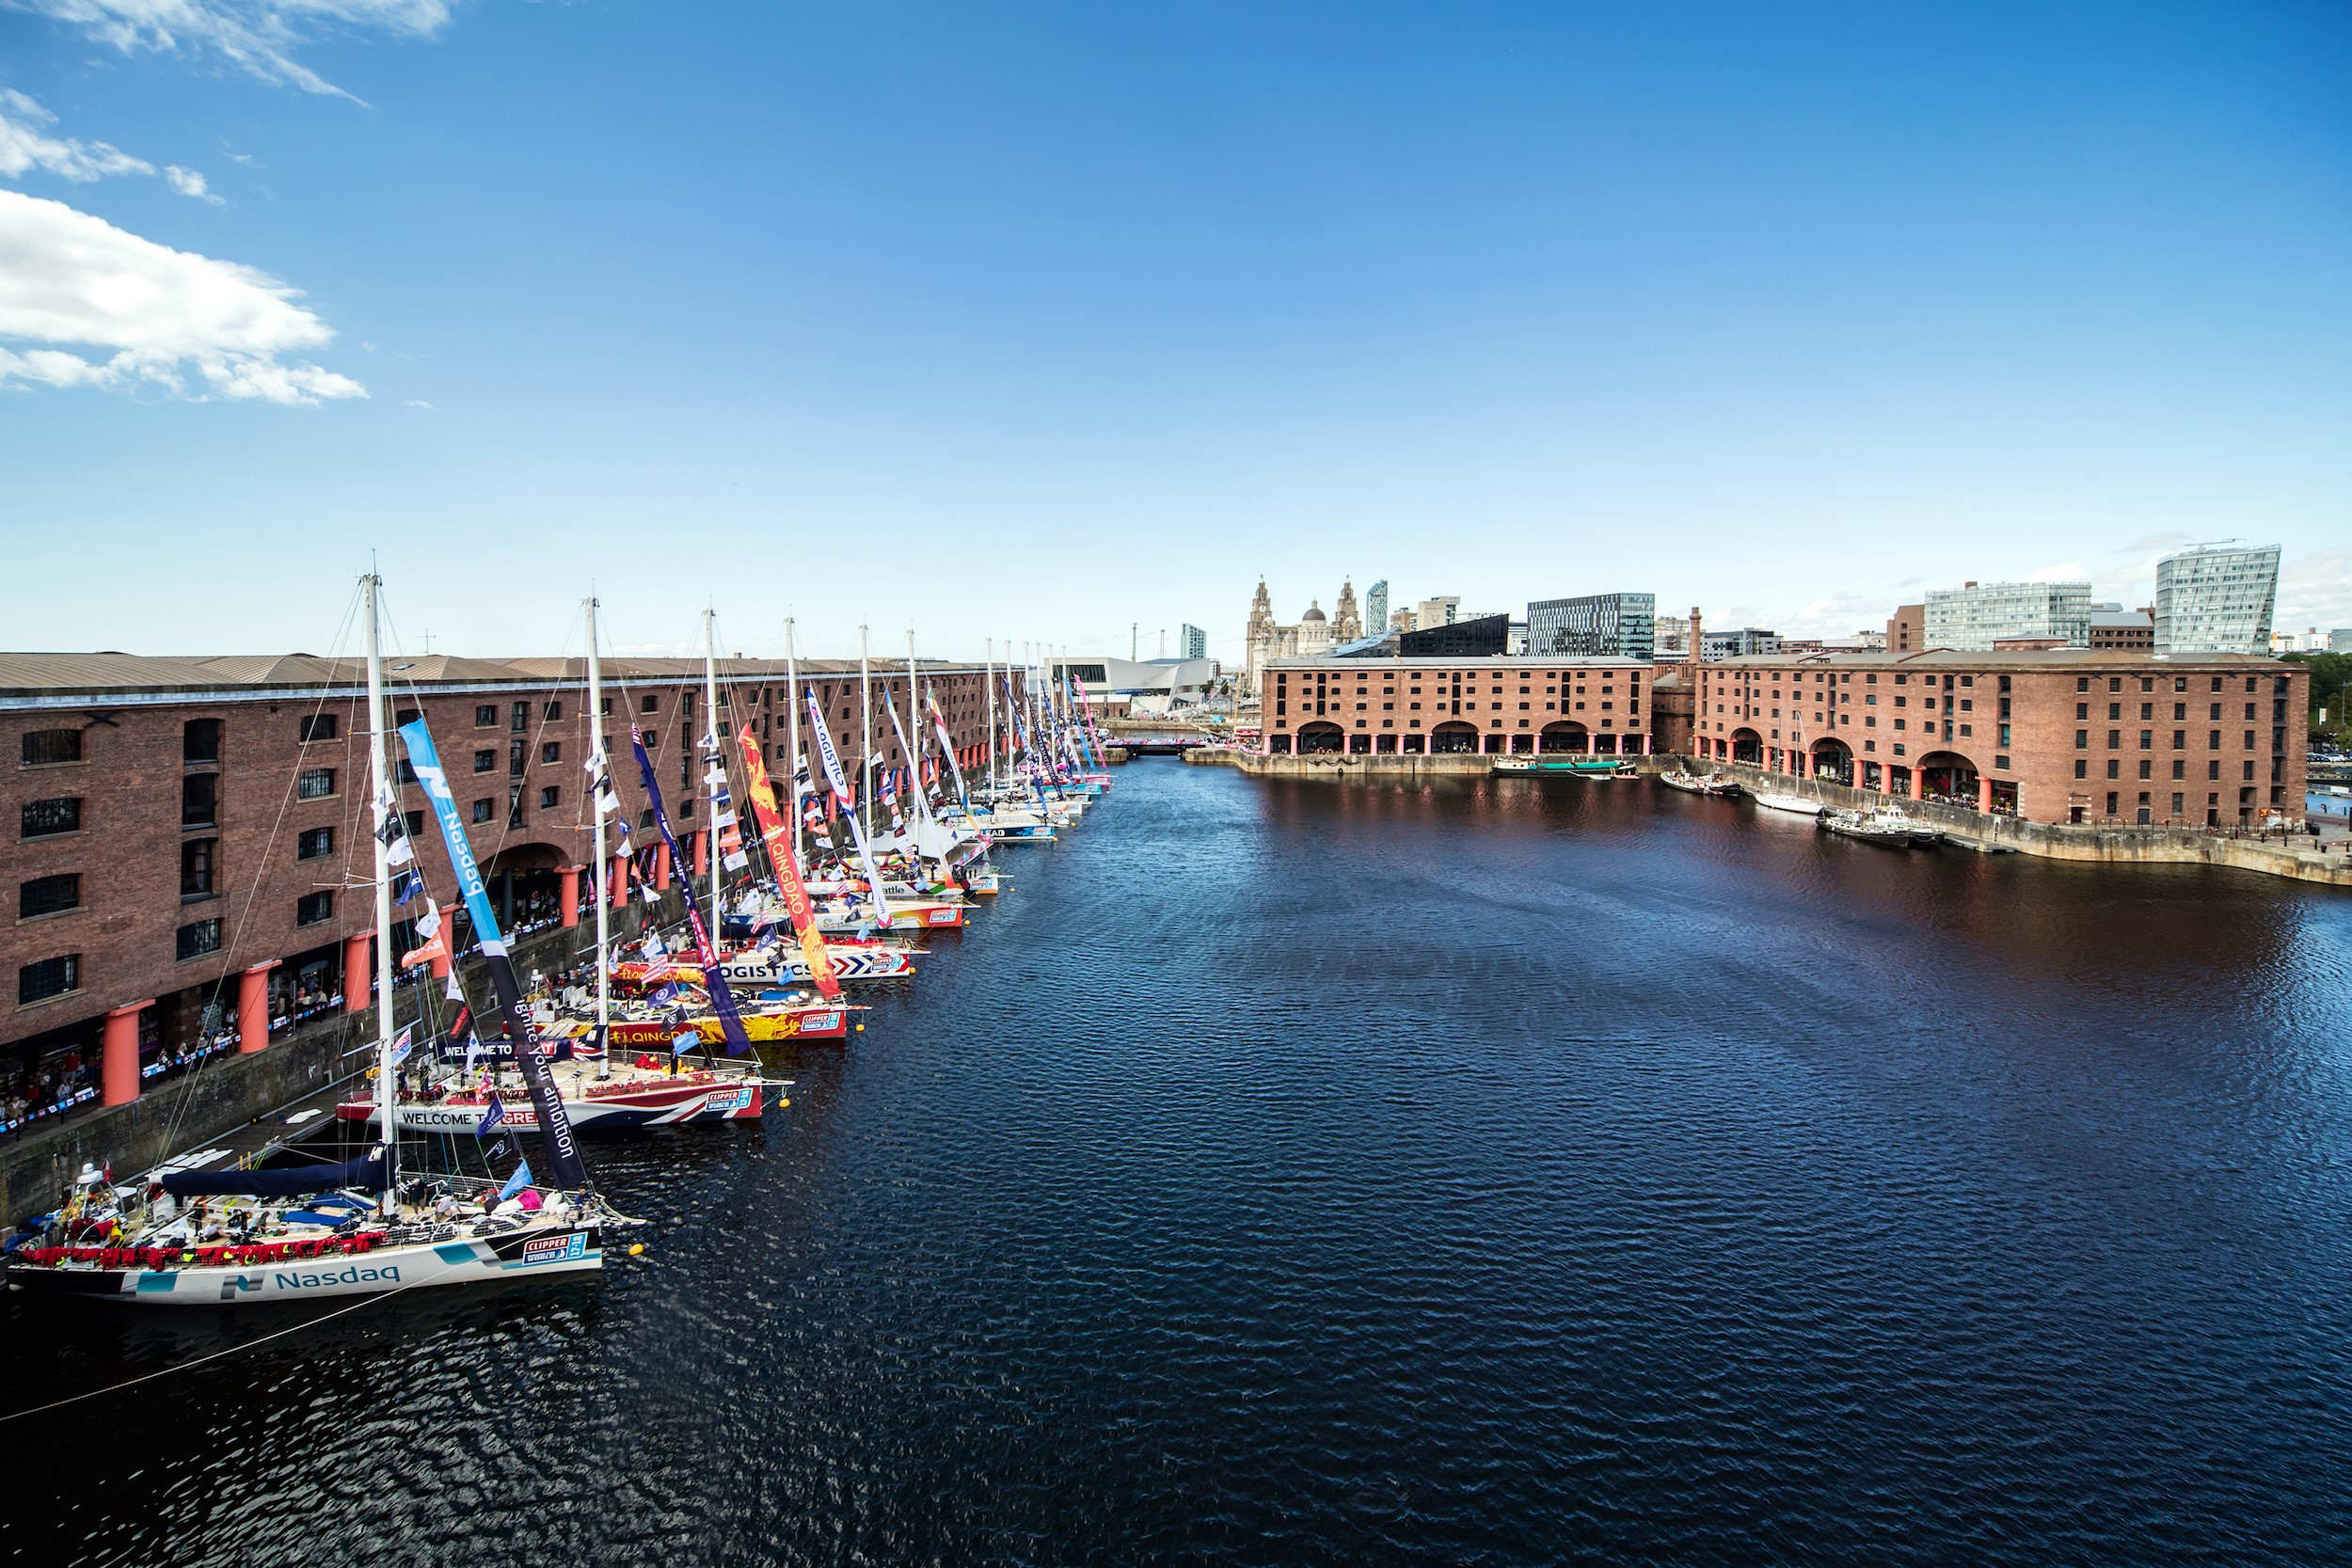 Historic moment as Albert Dock Liverpool receives Royal approval2500 x 1667